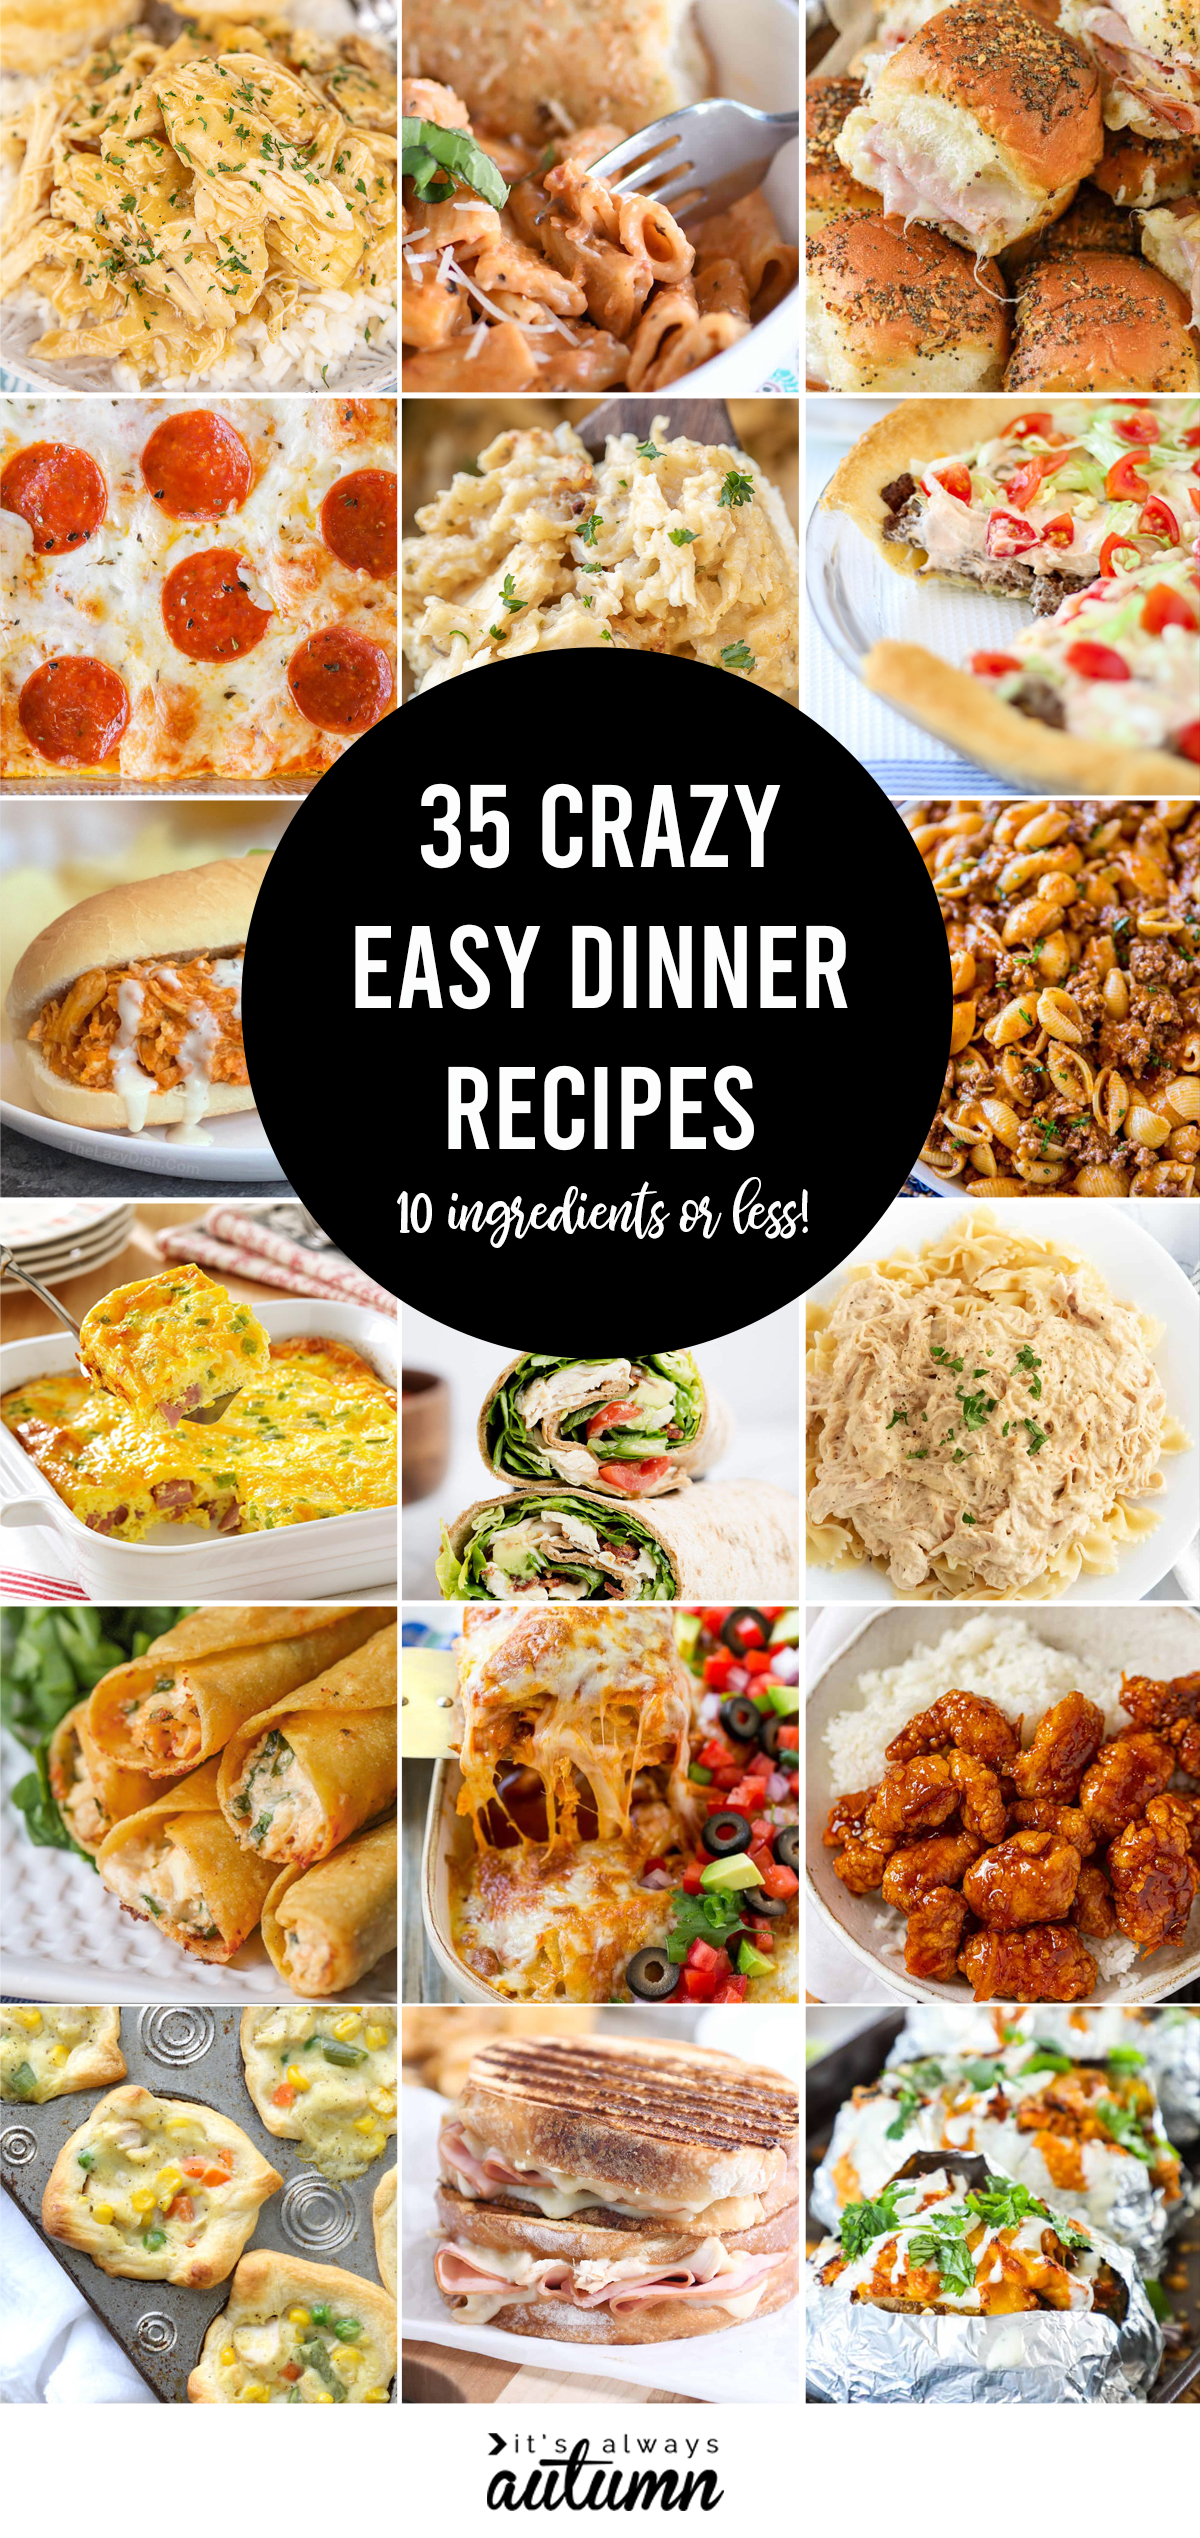 35 super easy dinner recipes - each of these simple dinner ideas uses 10 ingredients or less!